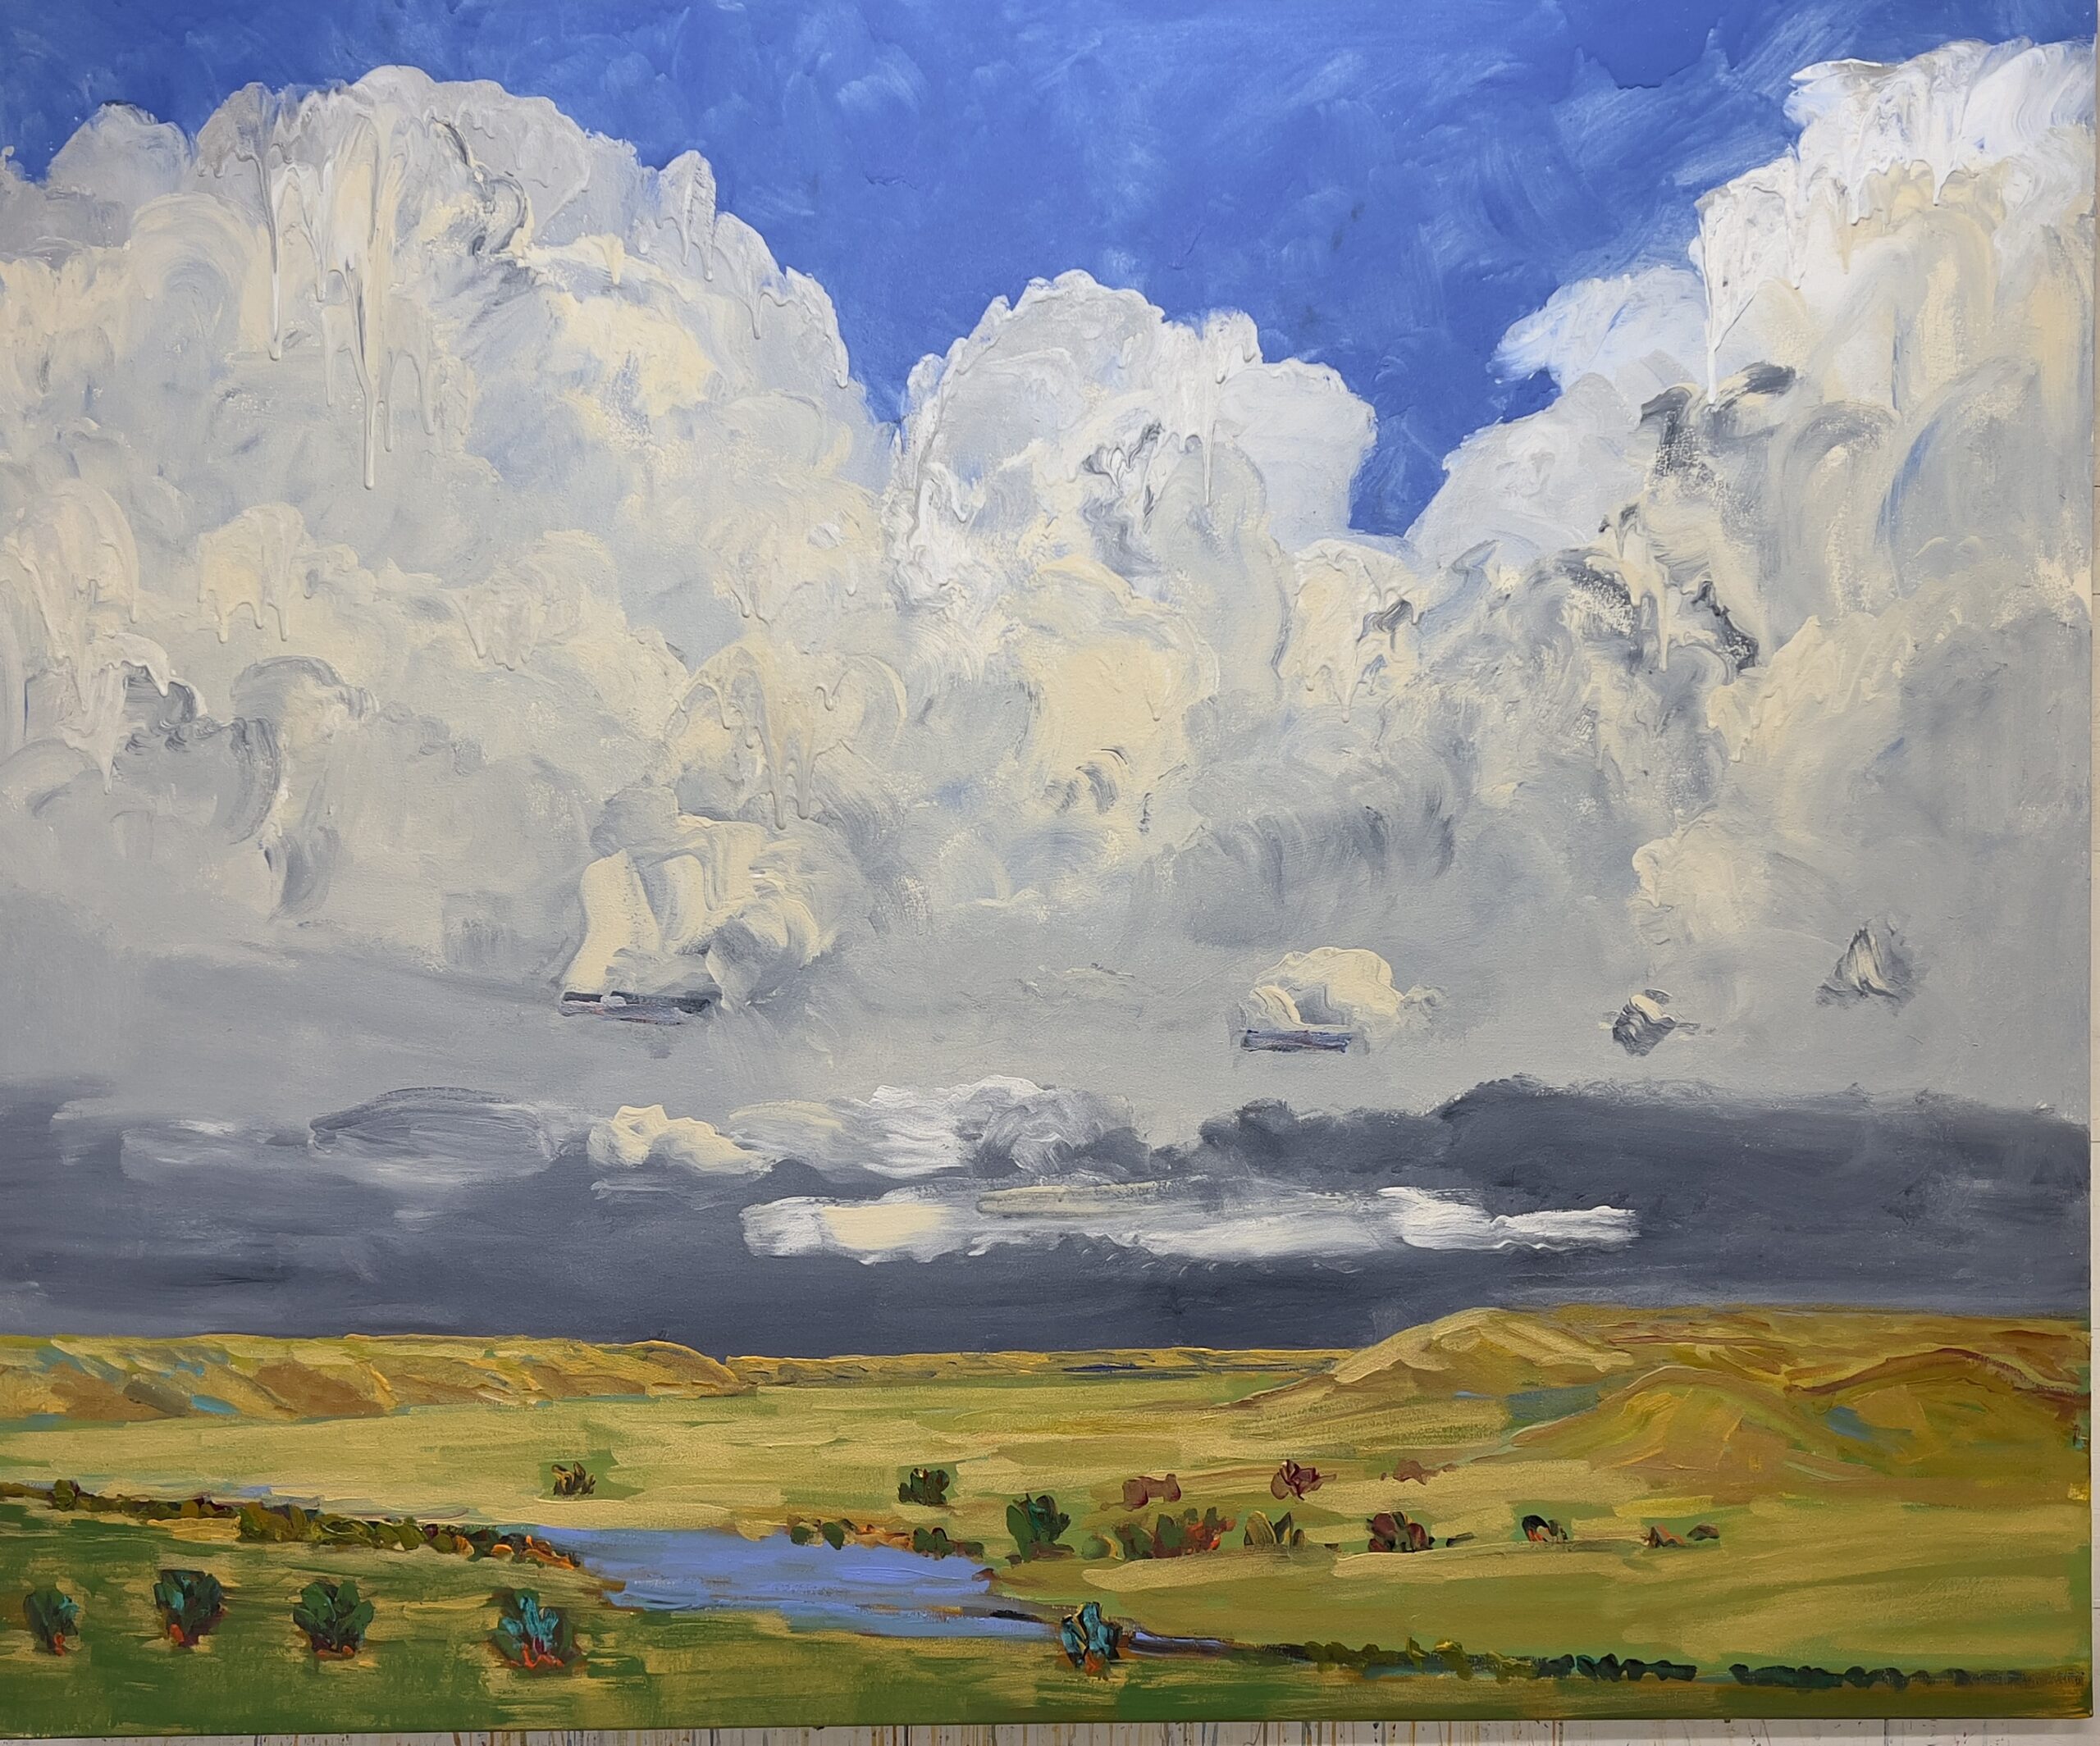 Frenchman River Valley 2022 acrylic on canvas 60 x 72